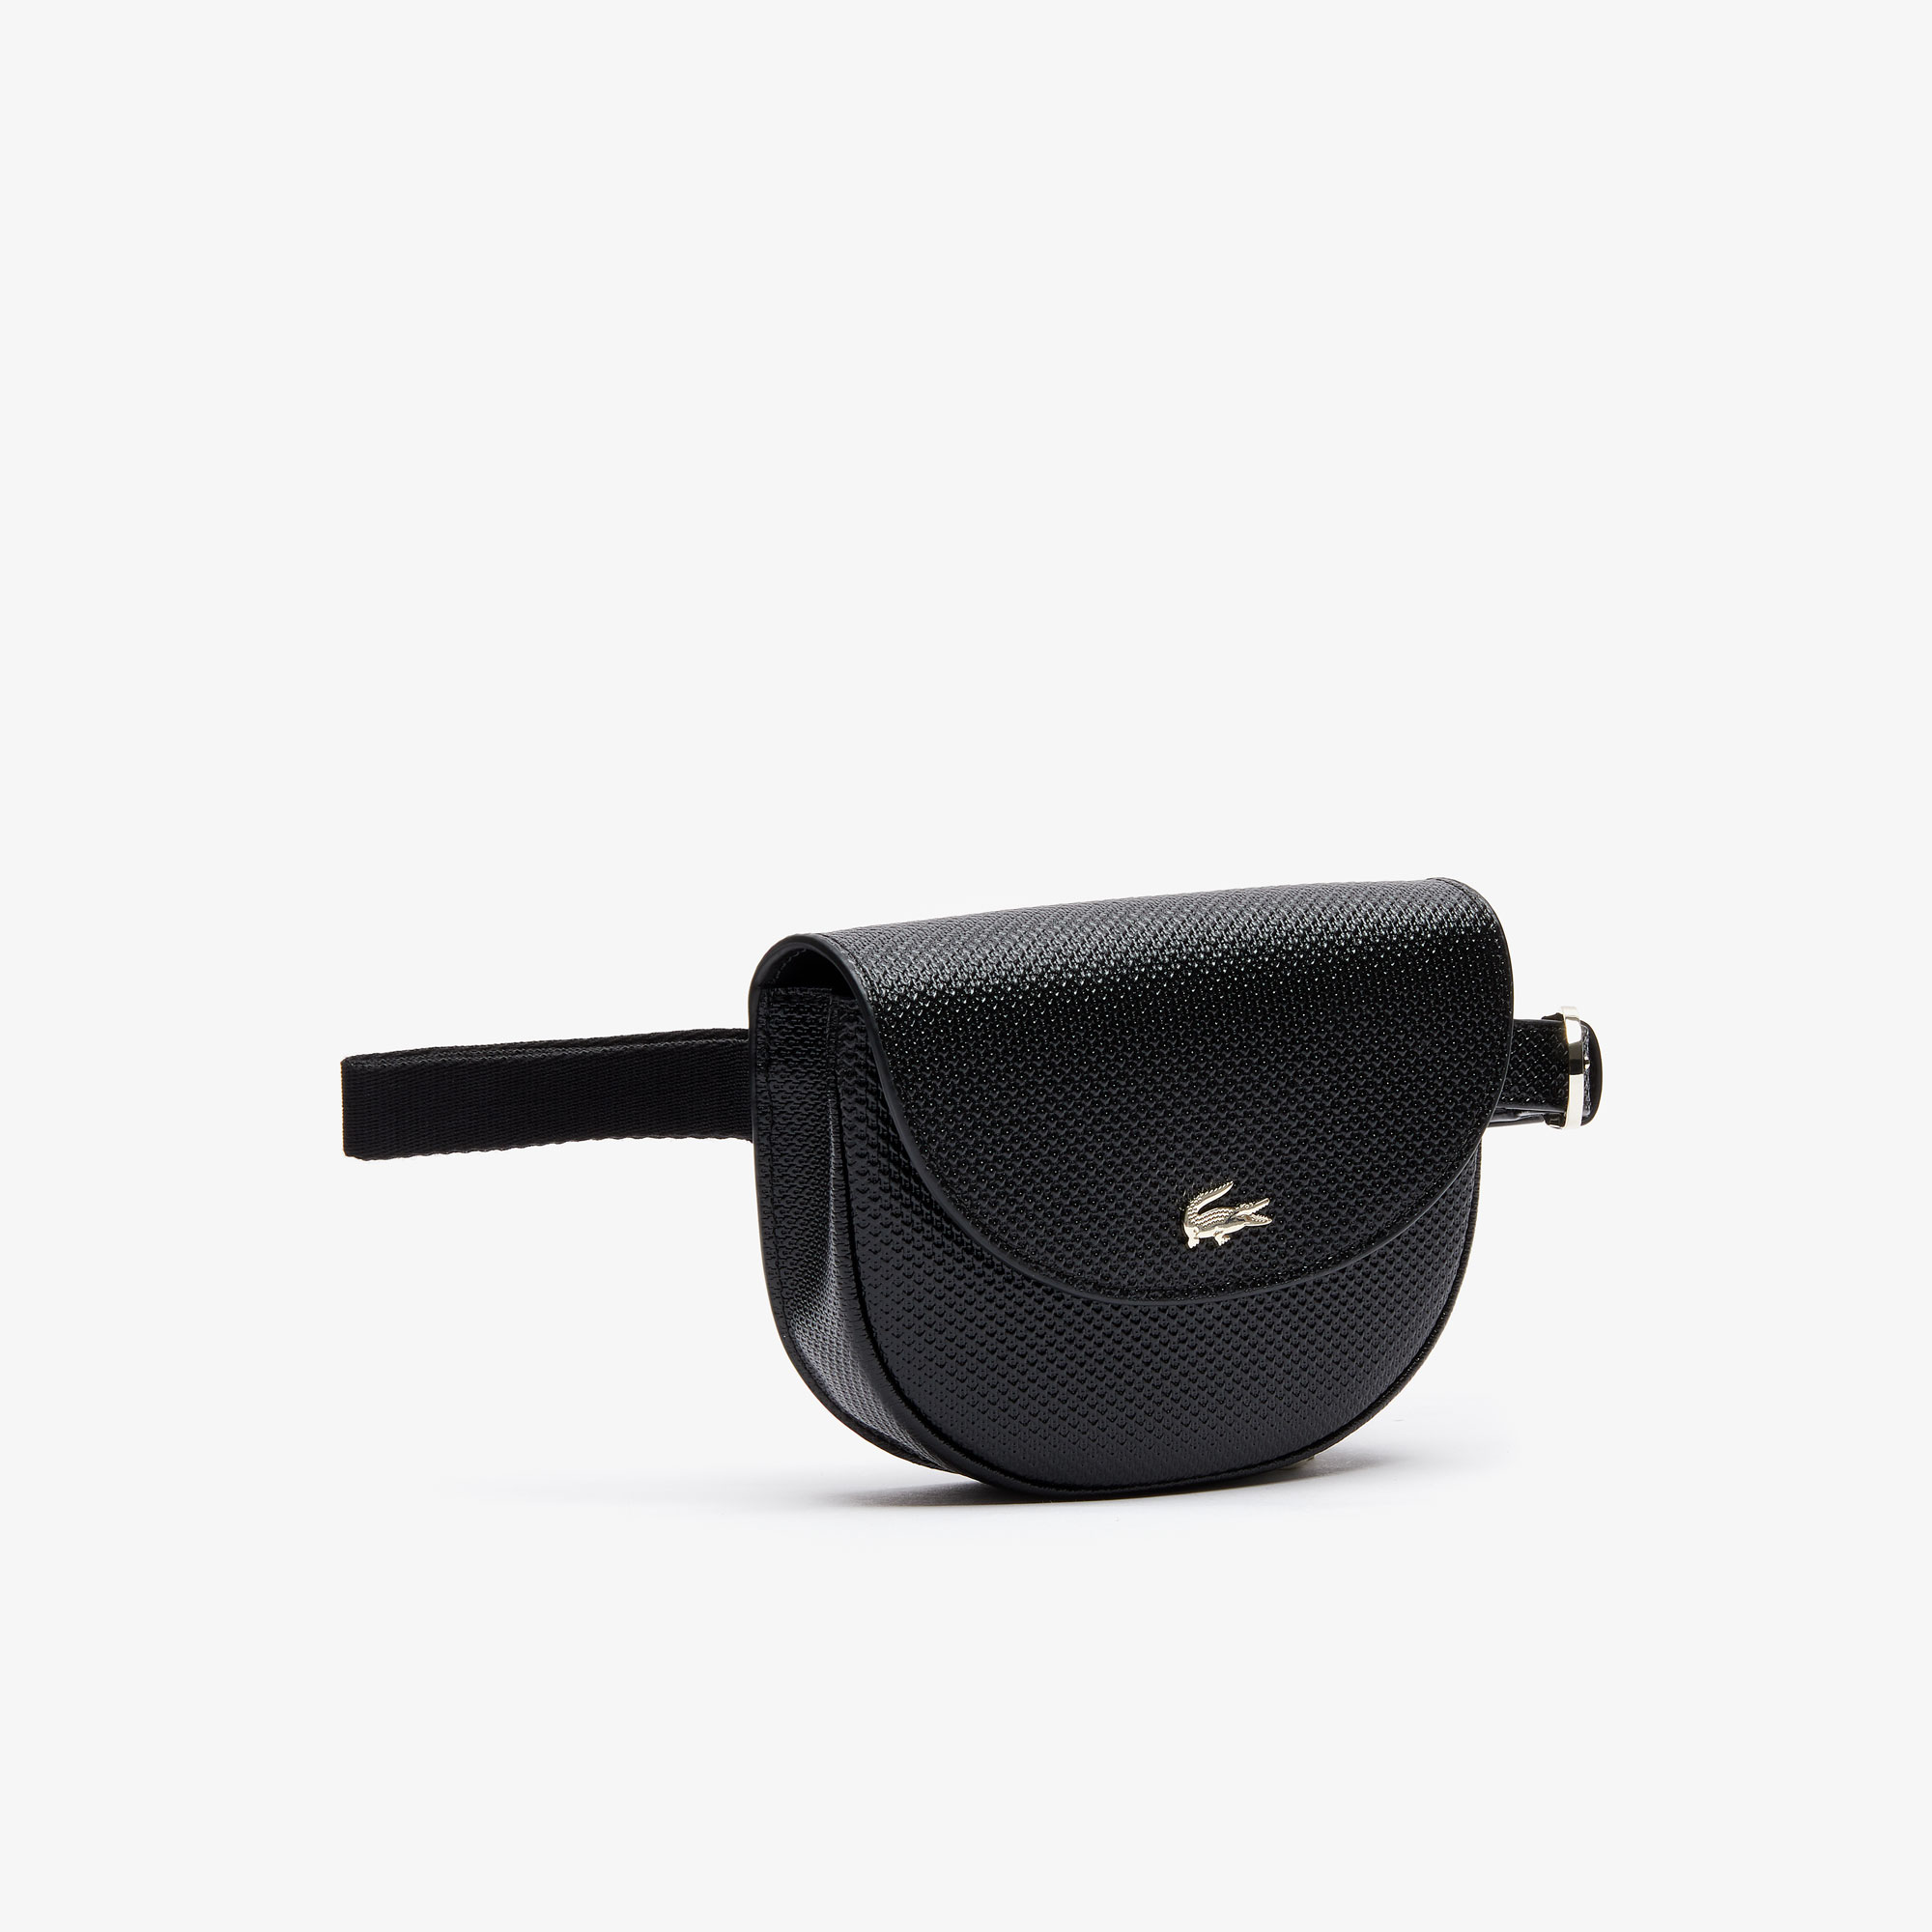 10 Best Fanny Pack in Singapore for Your Everyday Street Style [2022] 4